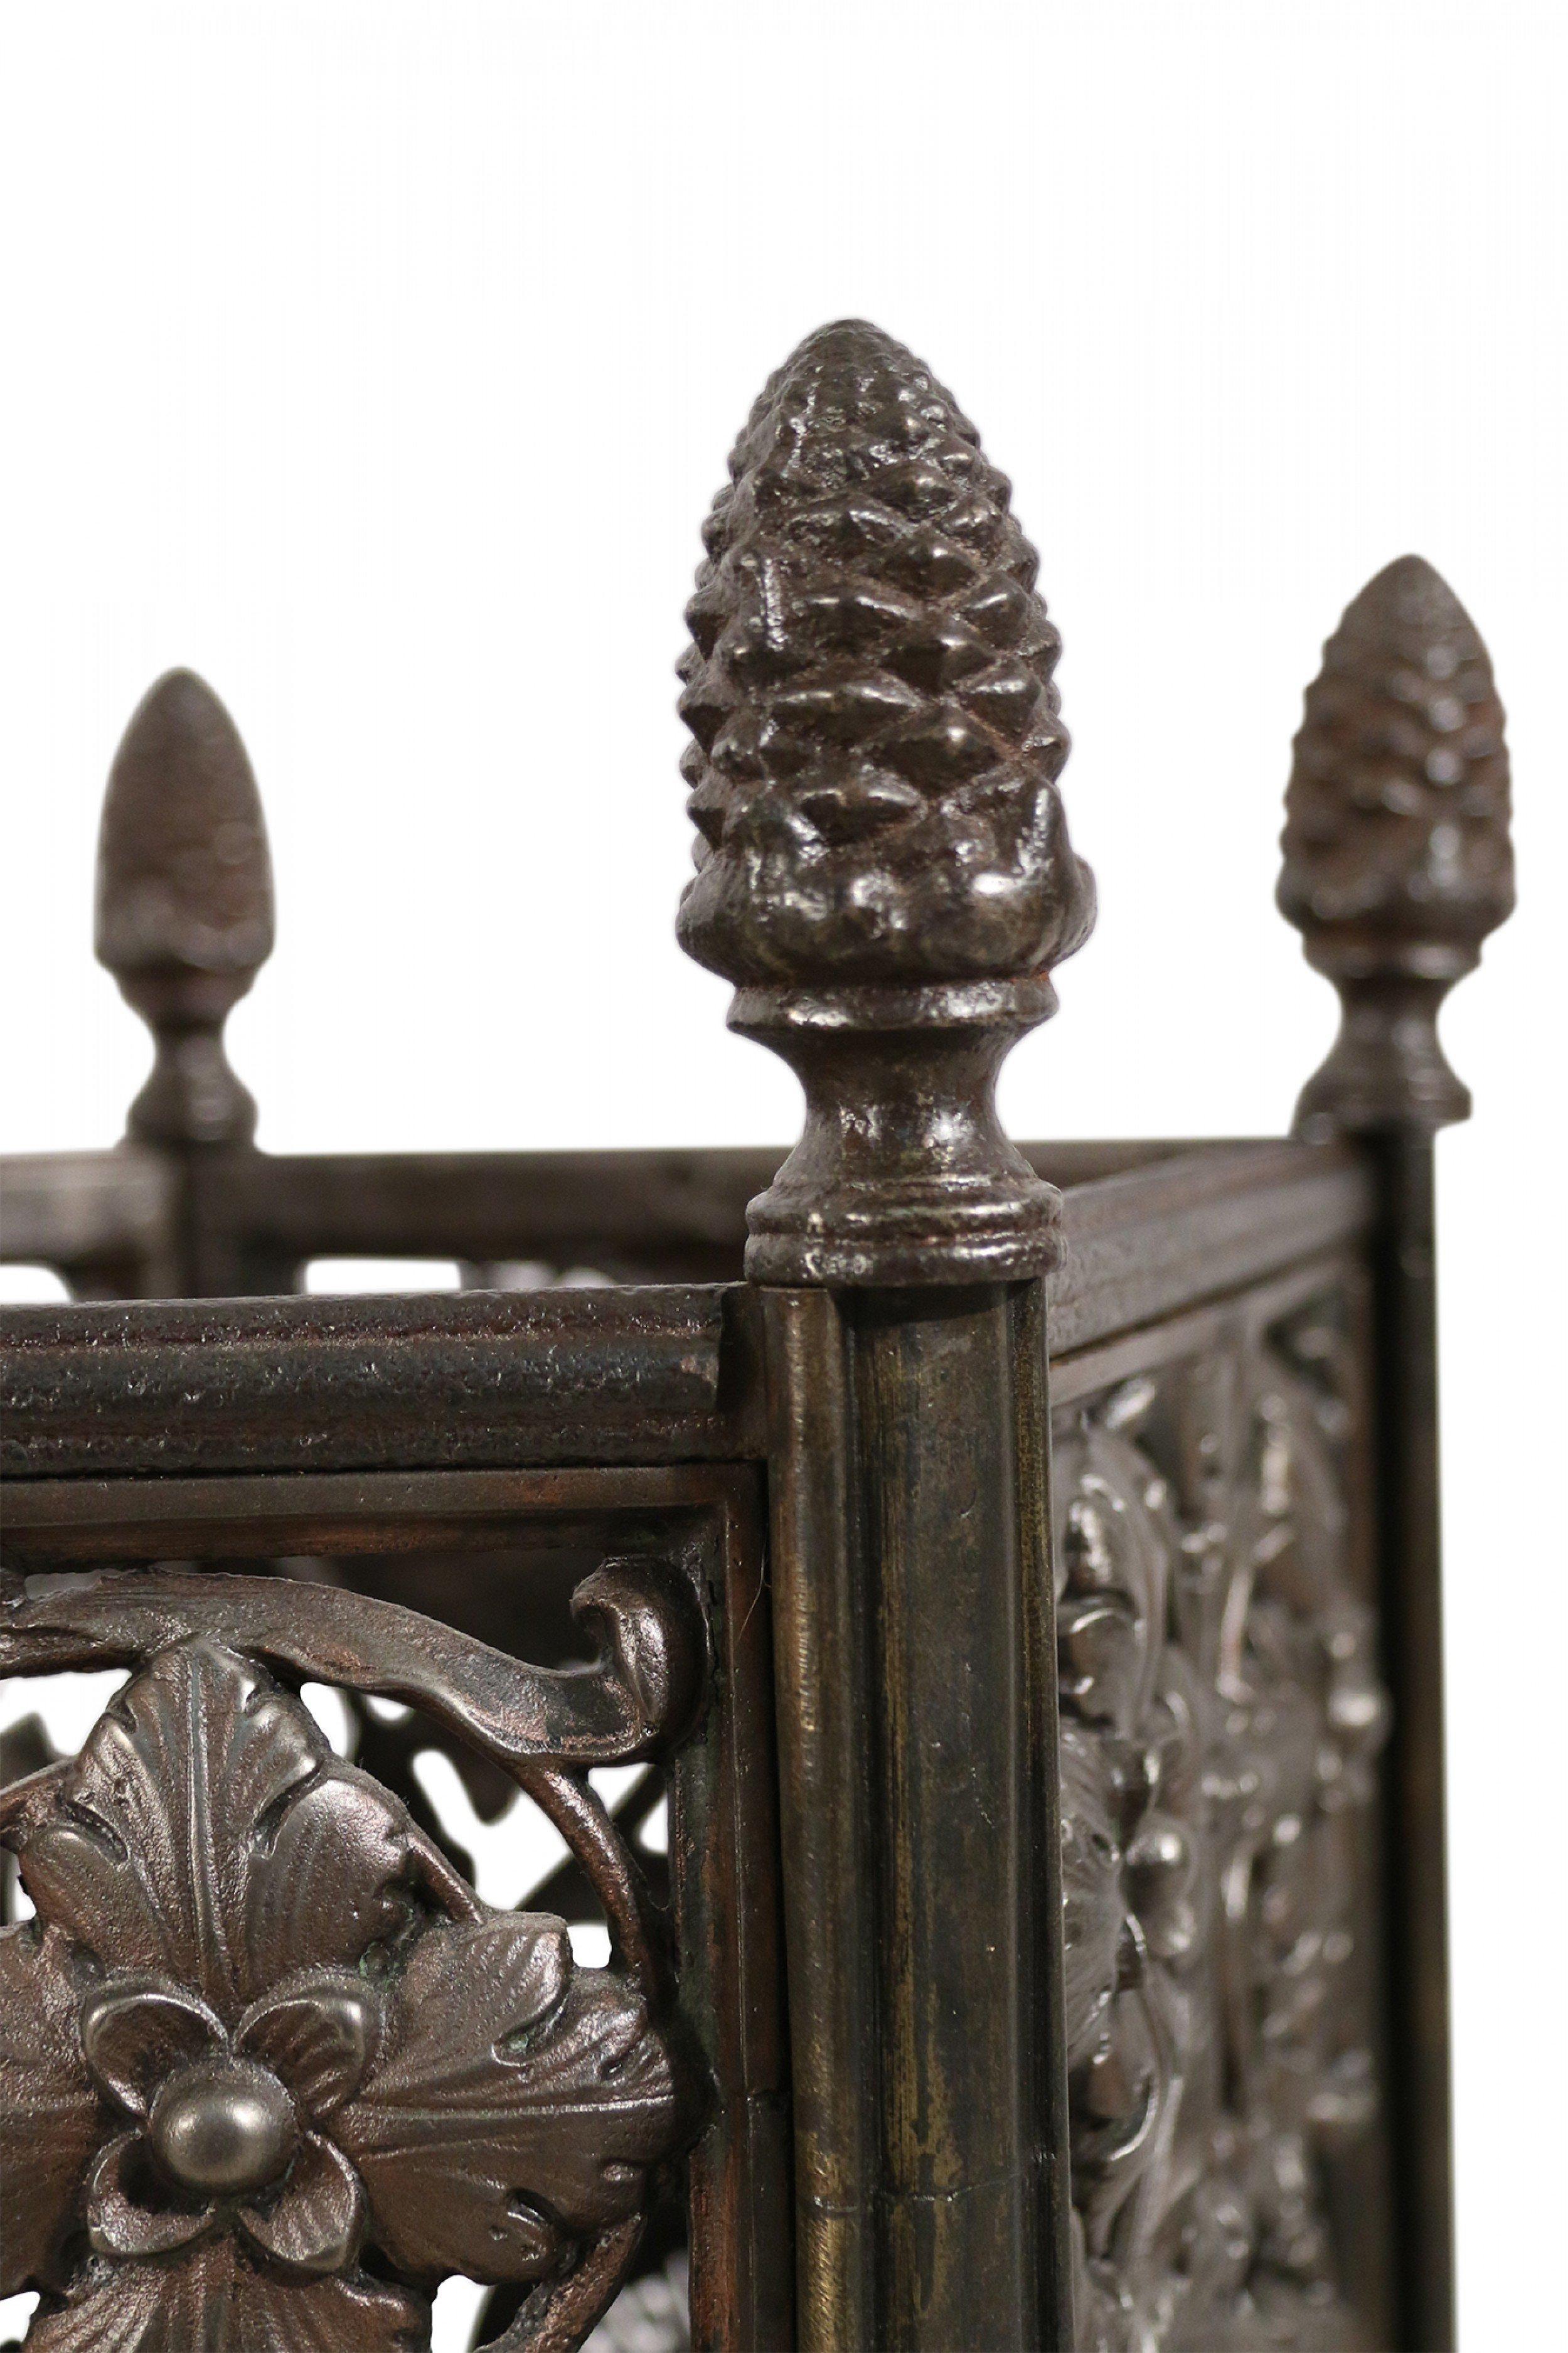 Pair of Italian Renaissance-style (19th Century) floral metal filigree containers / umbrella stands with 5 sides, spherical feet, and mulberry-shaped finials. (Priced as pair).